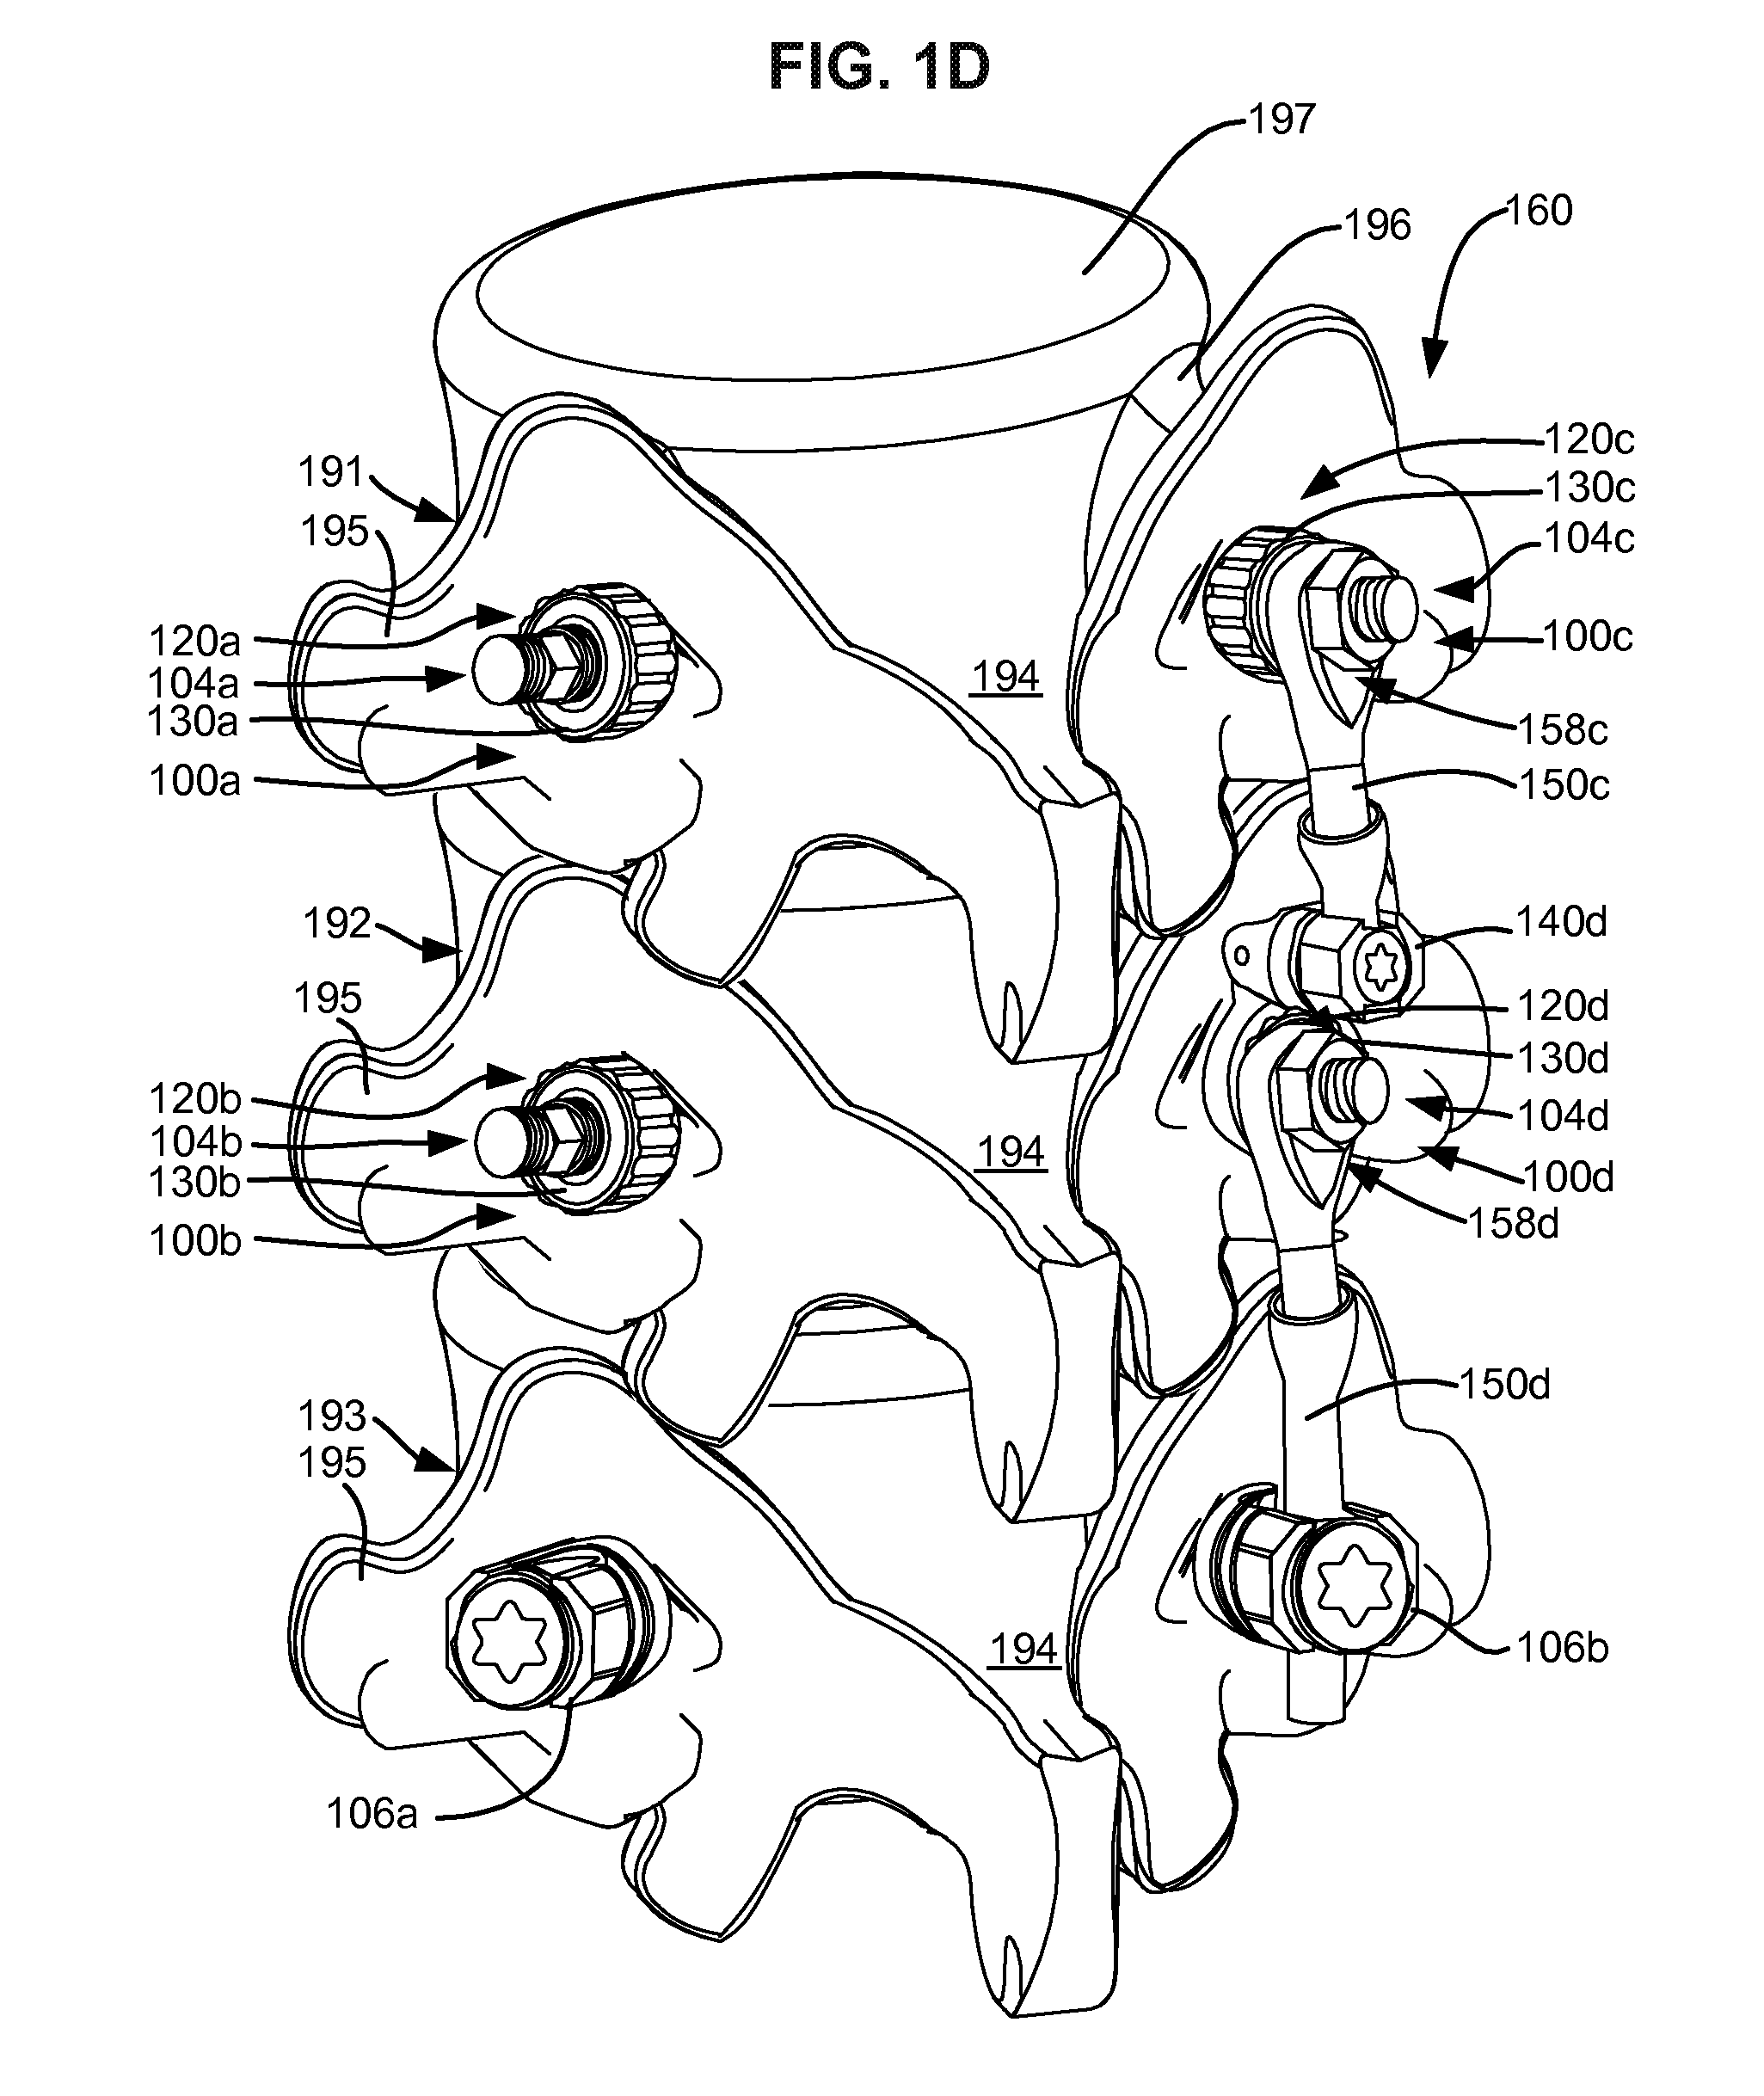 Compound spinal rod and method for dynamic stabilization of the spine